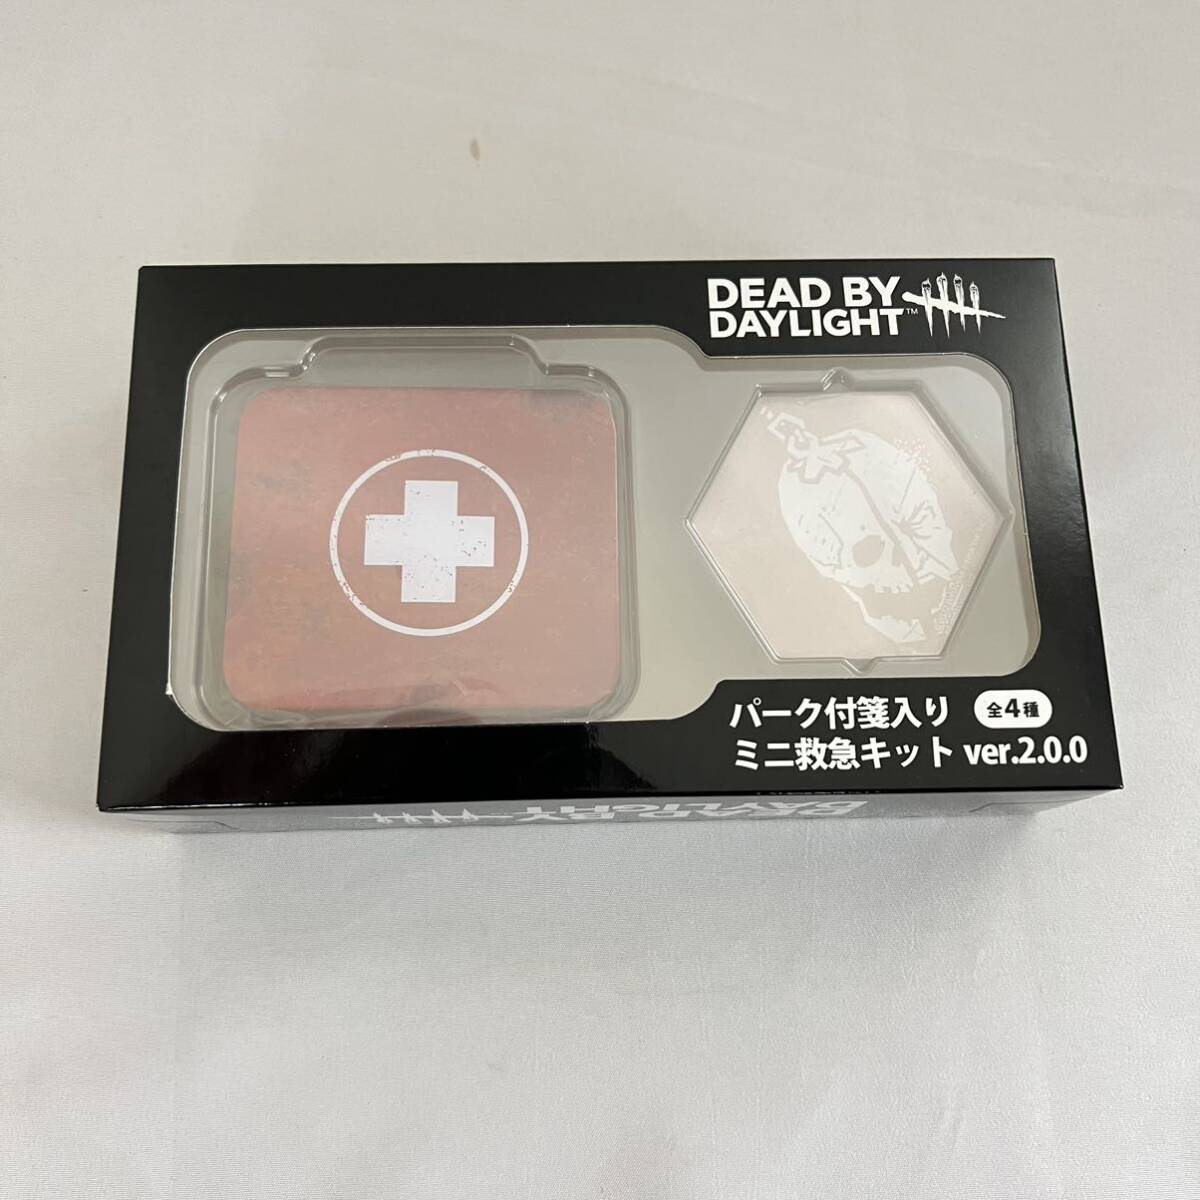 Dead by Daylight デッドバイデイライト パーク付箋入り ミニ救急キット DBD ver.2.0.0 グッズ ゲーム_画像1